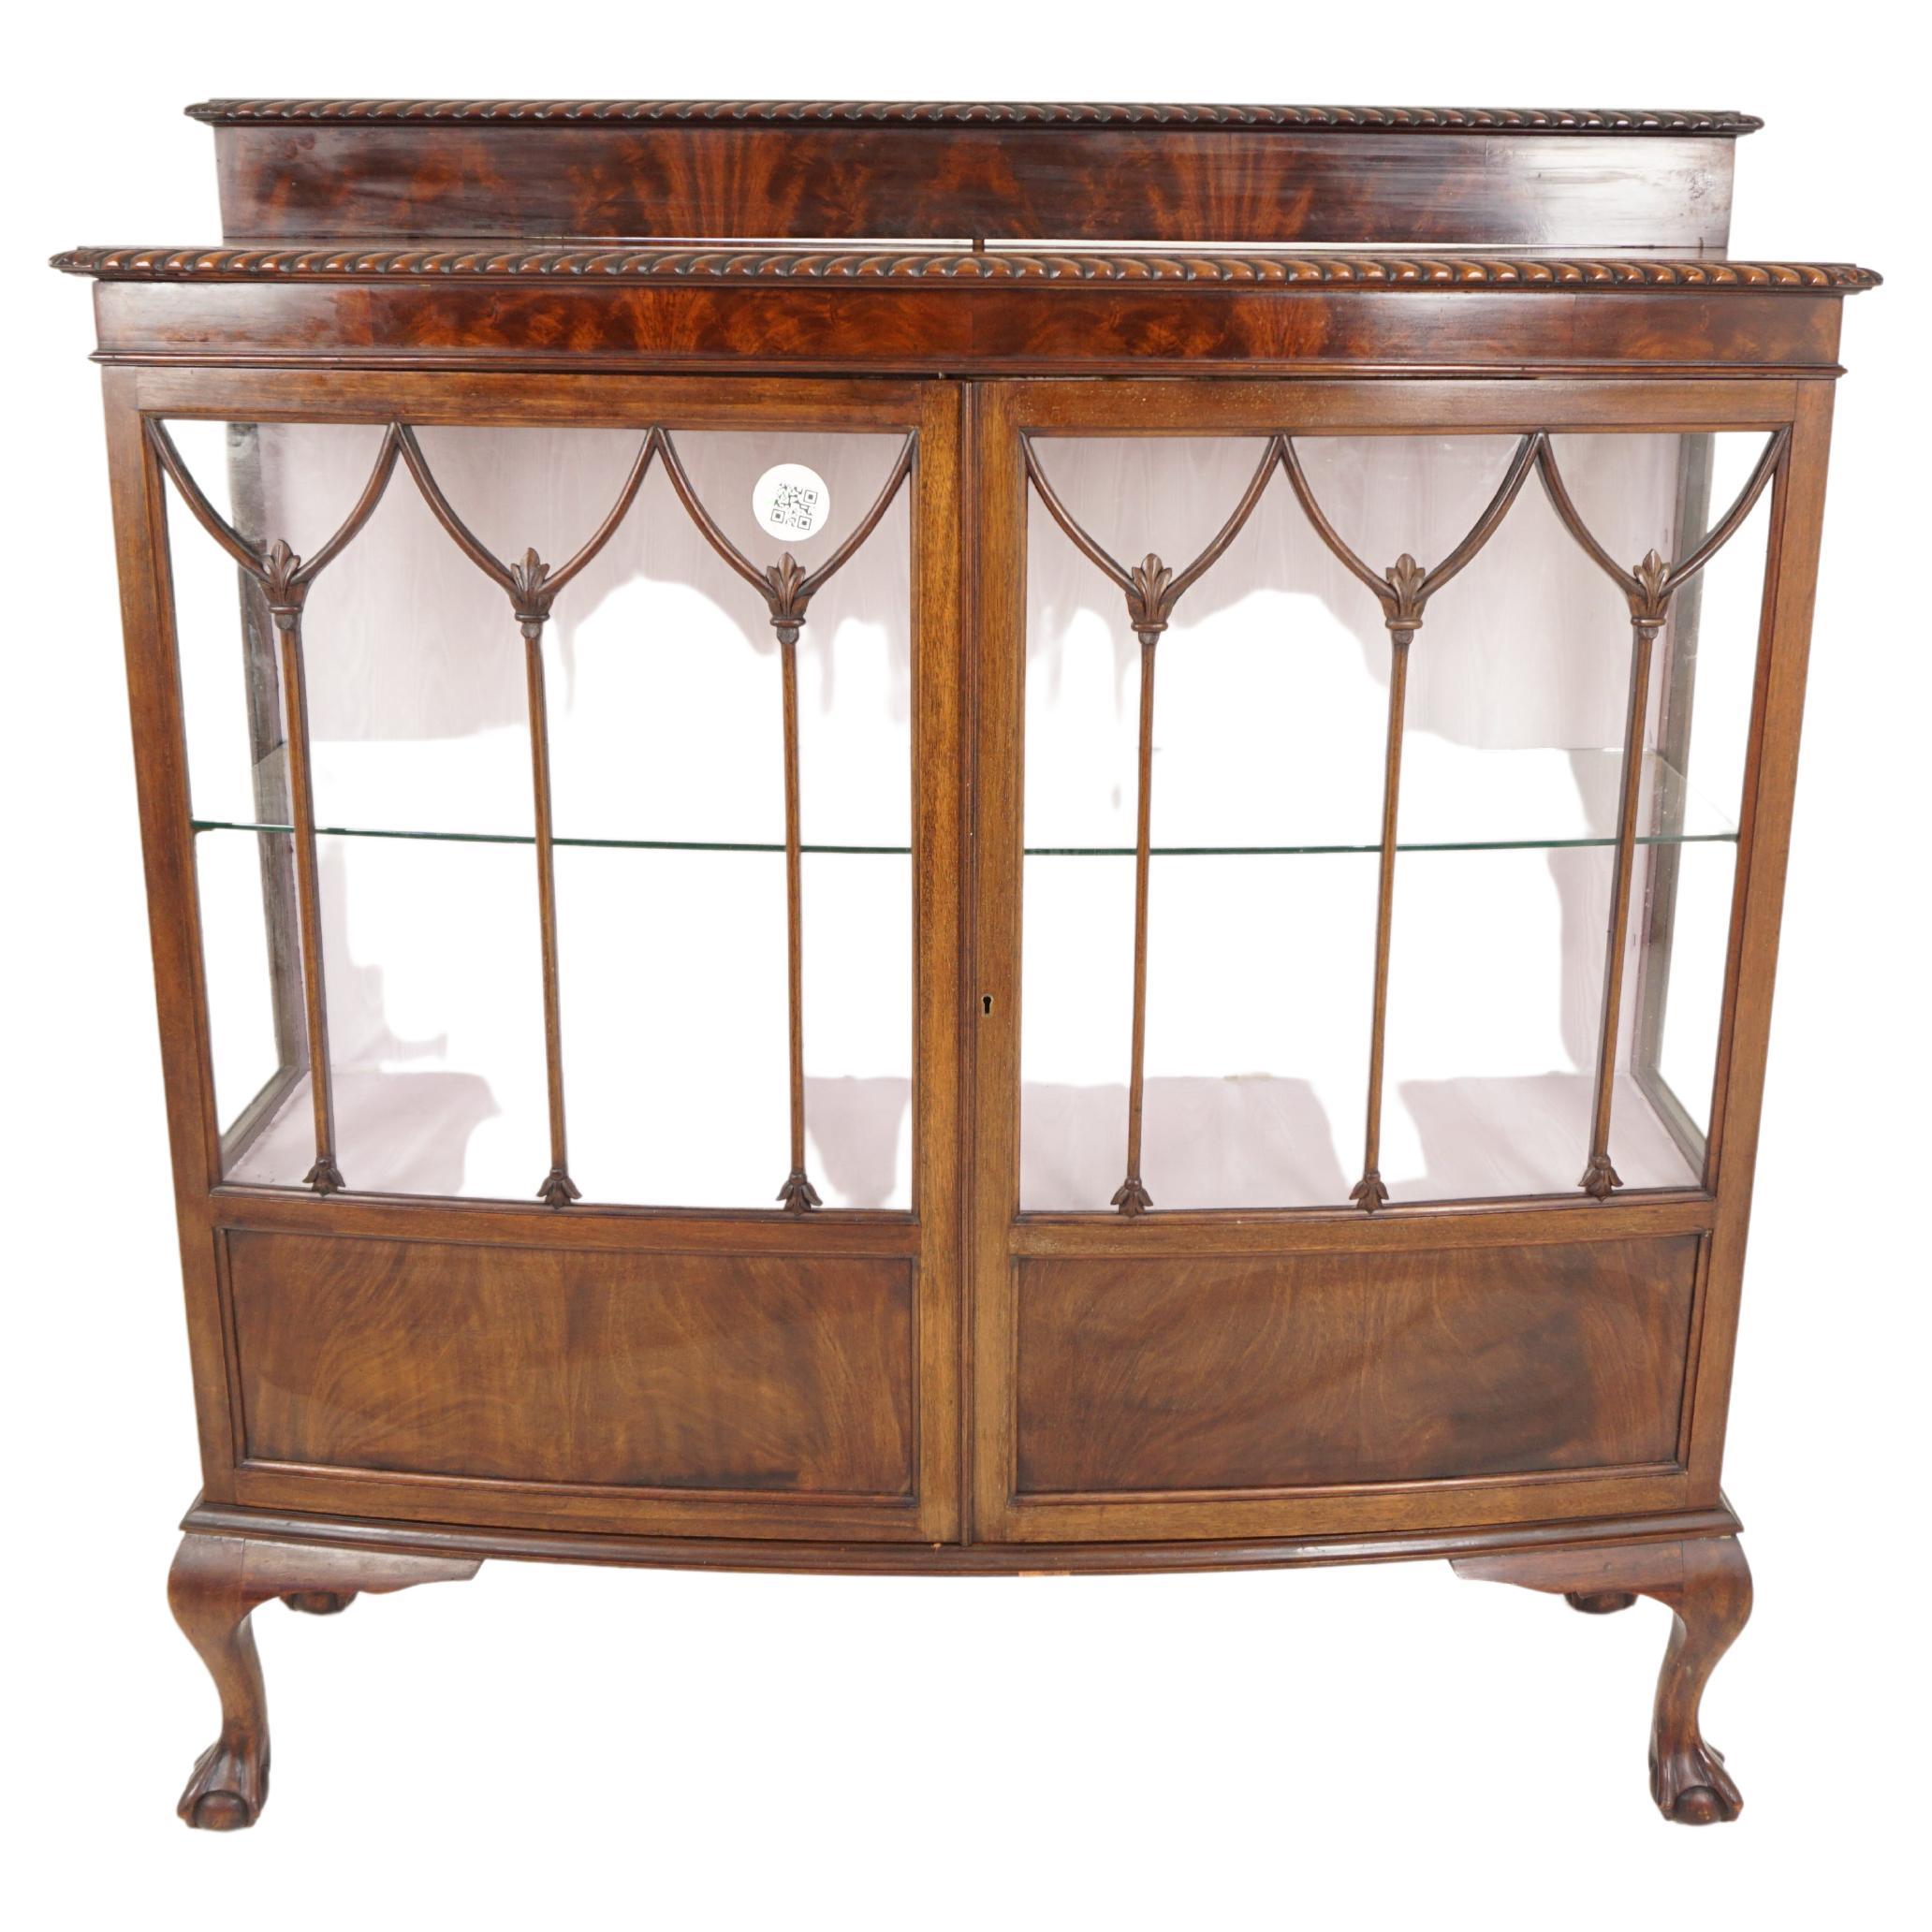 Large Ant, Walnut Bow Front Display Cabinet, China Cabinet, Scotland 1910, H807